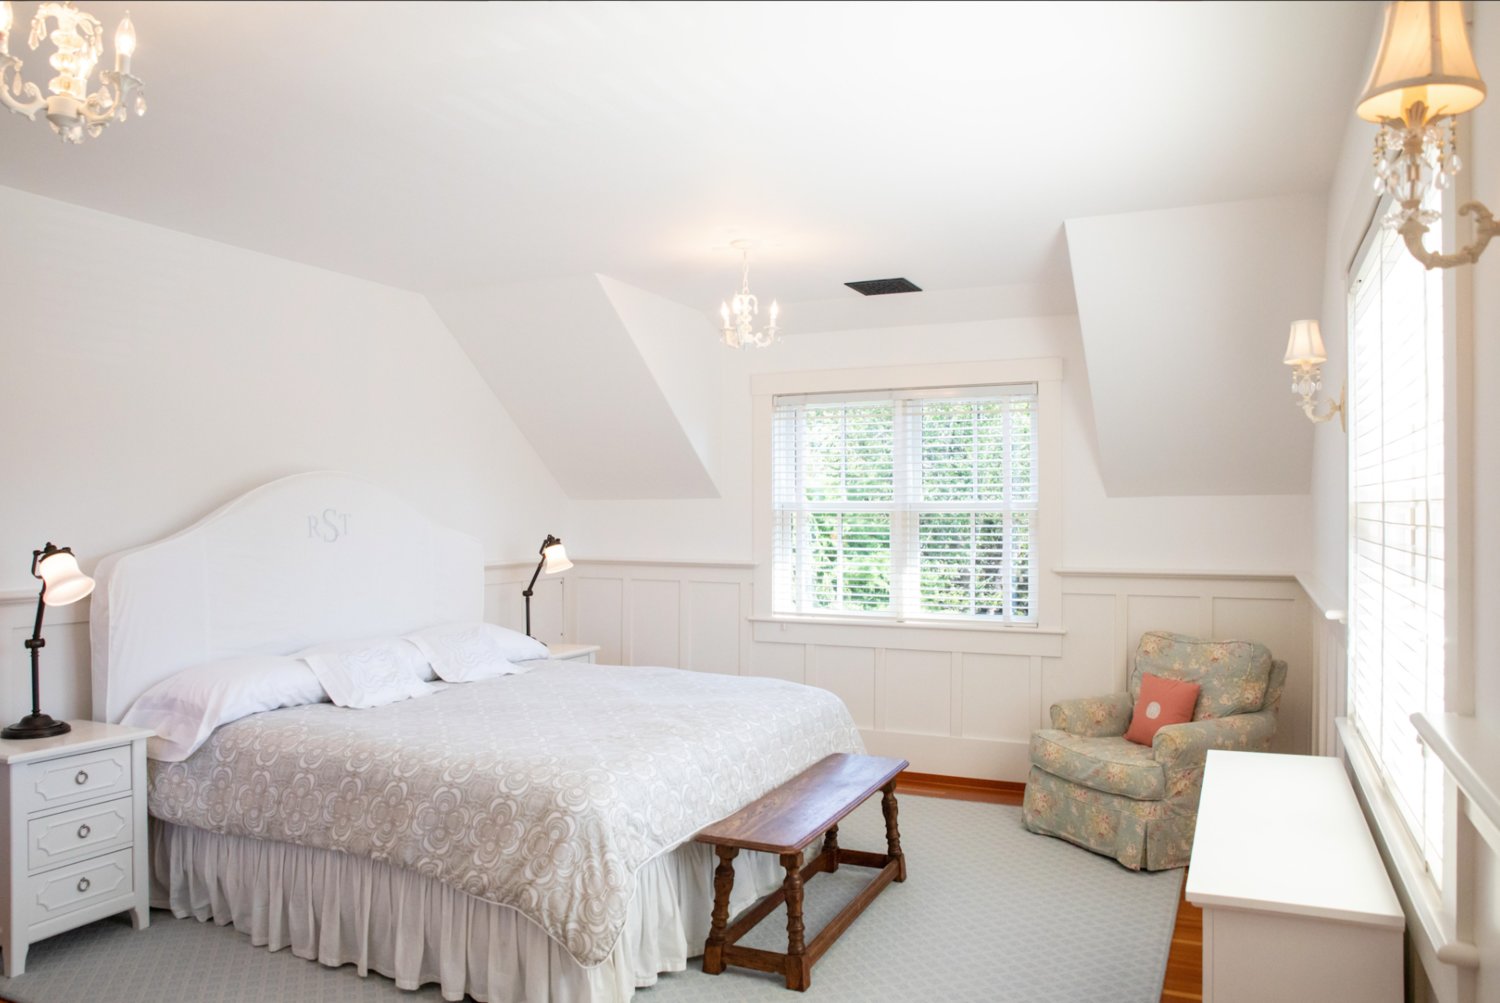 This second-floor bedroom has a vaulted ceiling and plenty of natural light.